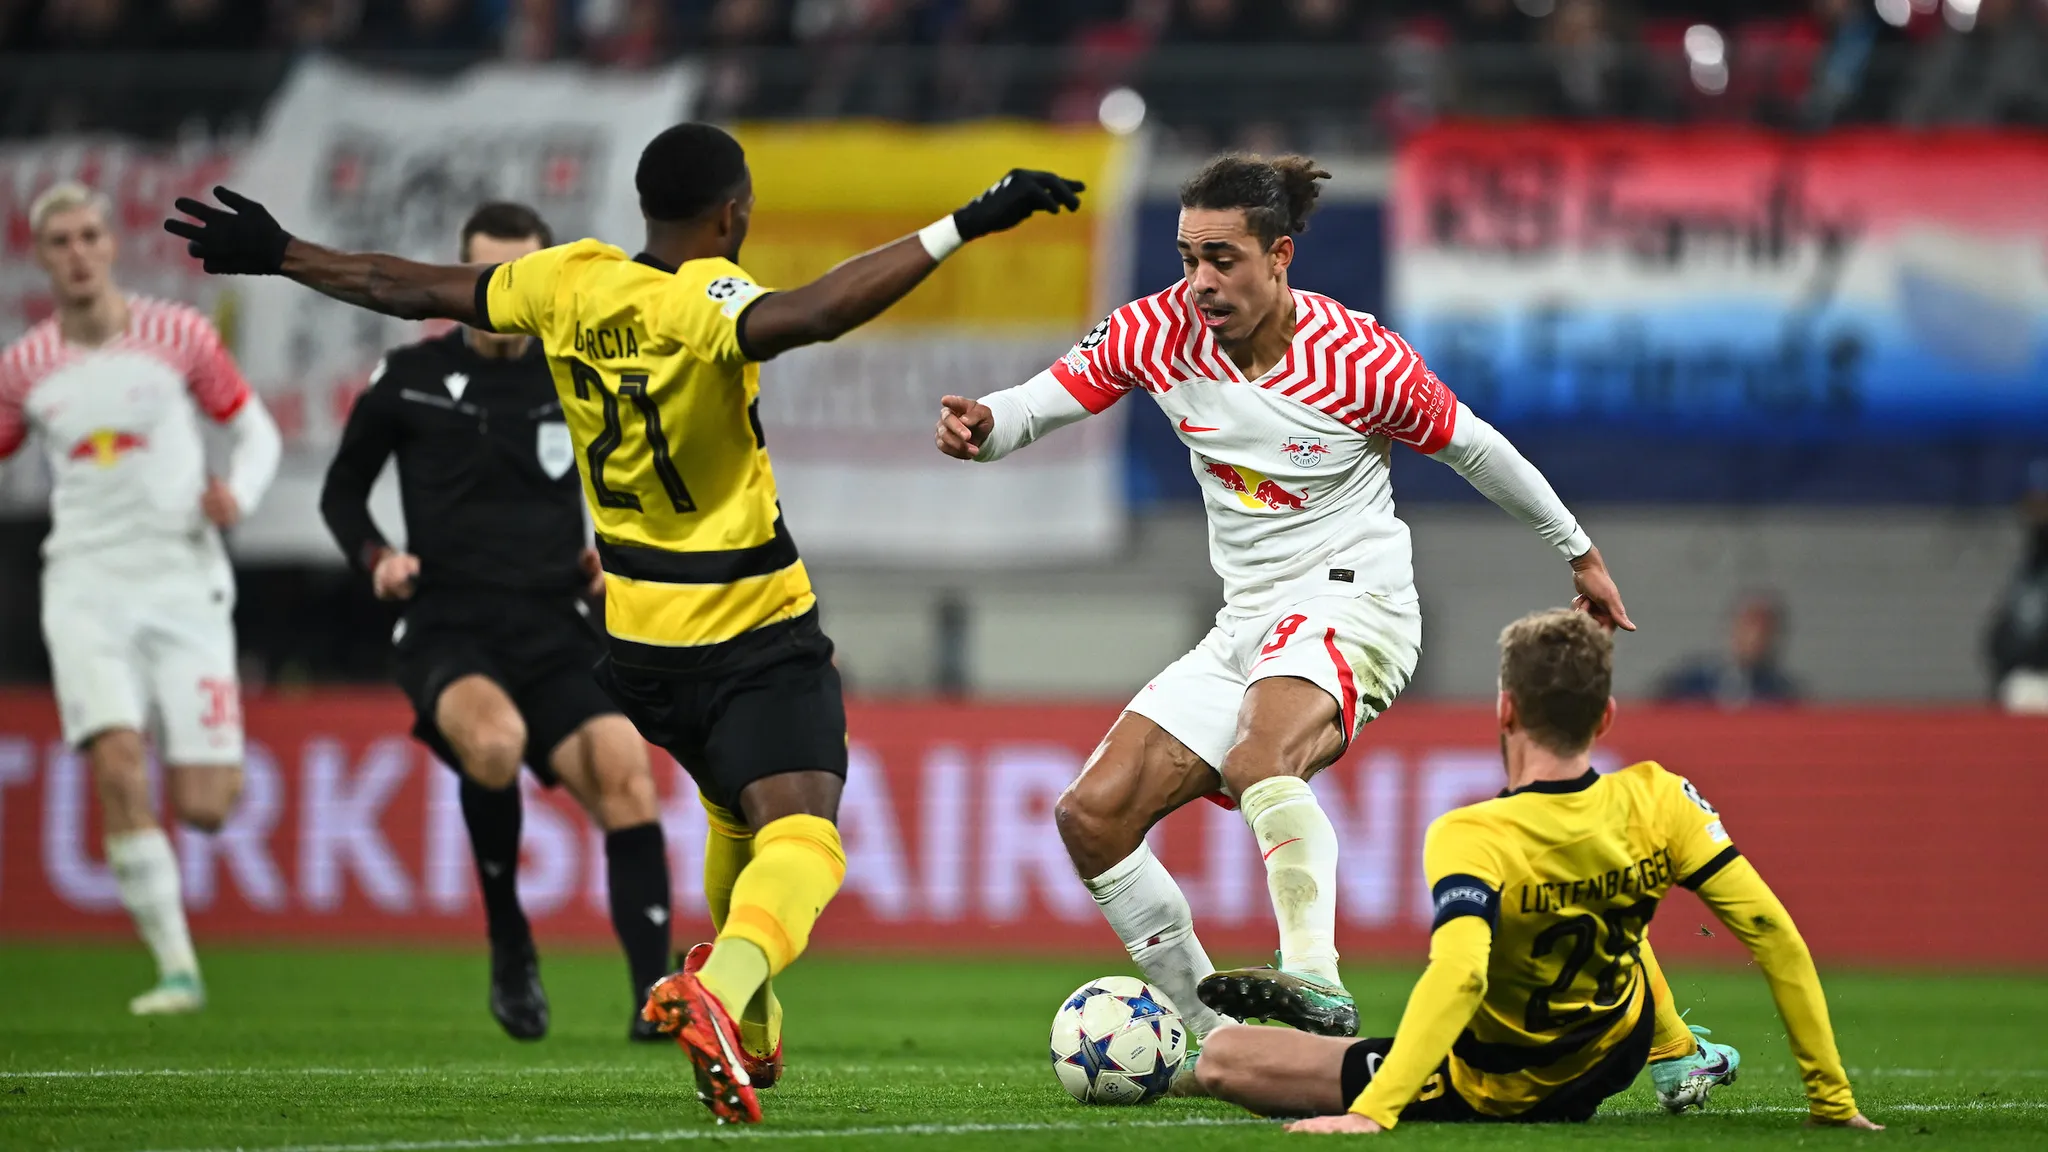 Yussuf Poulsen takes on two Young Boys players